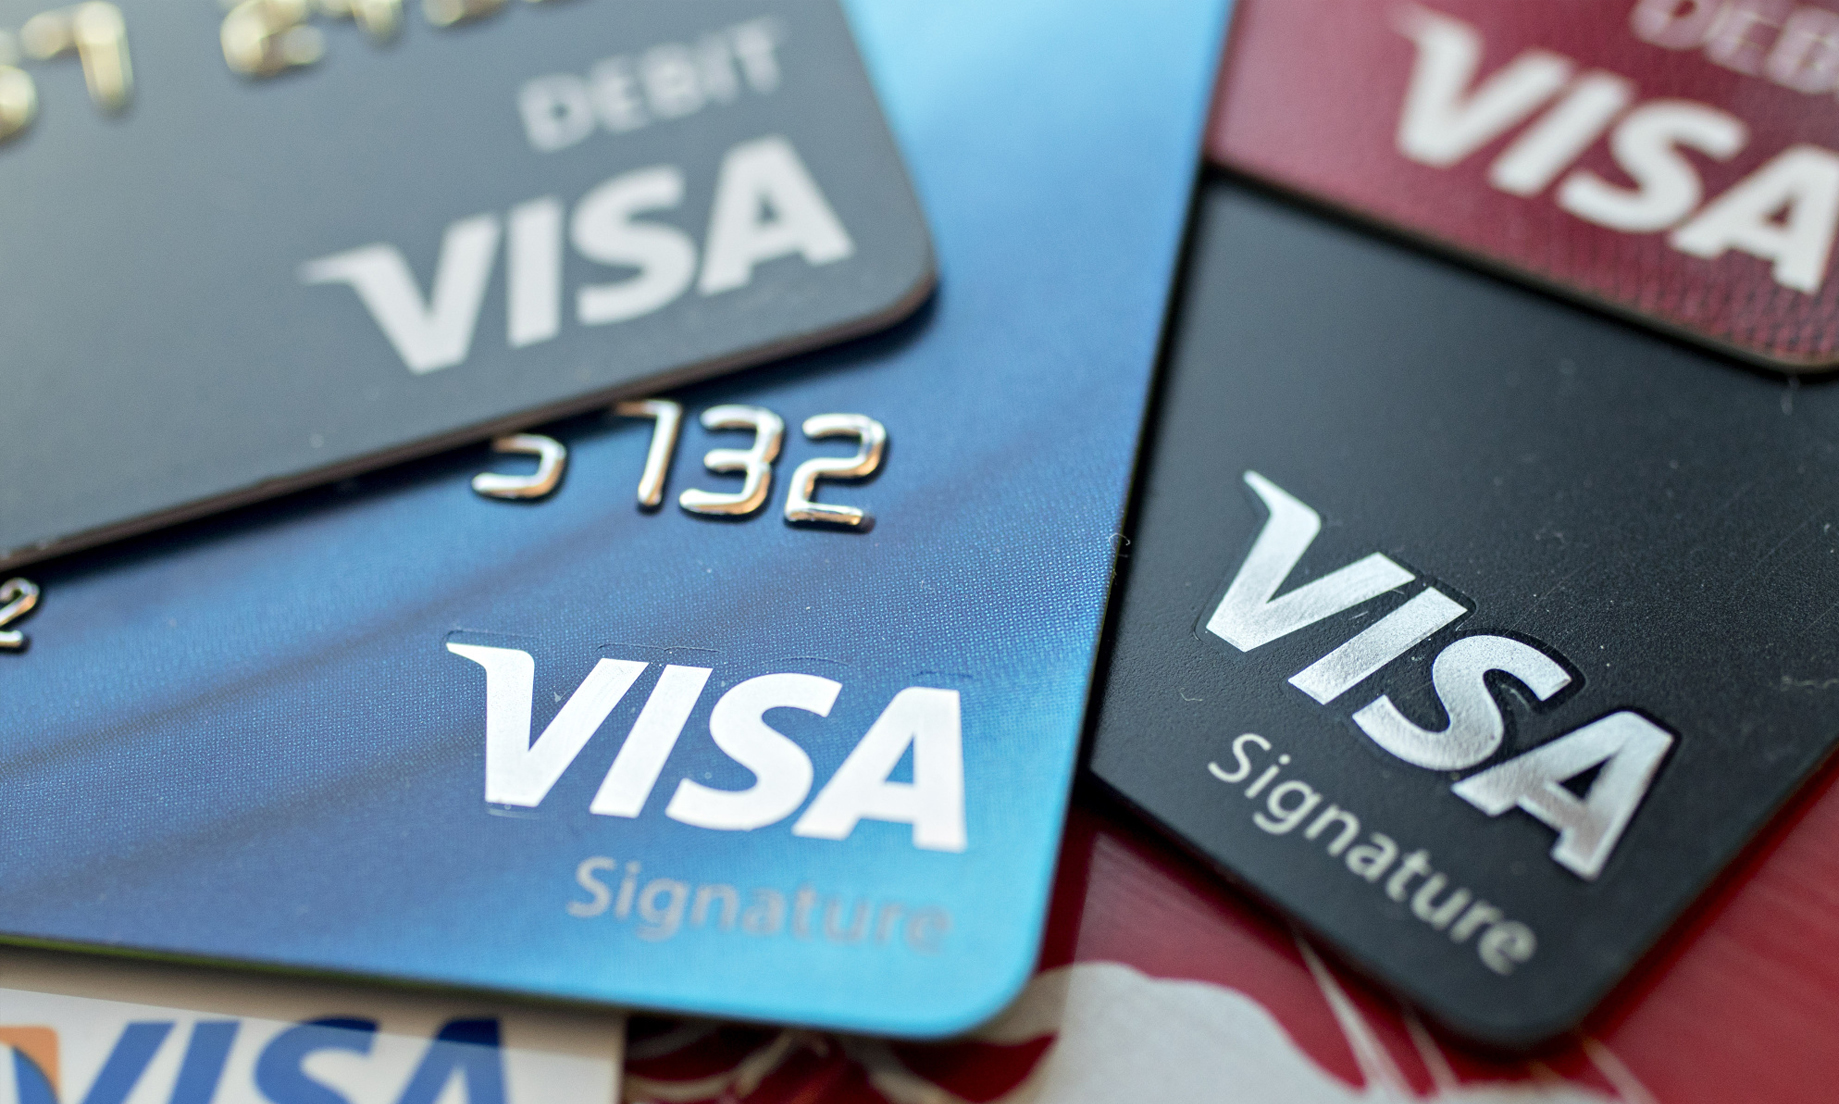 Visa launches first mobile concierge app in Malaysia